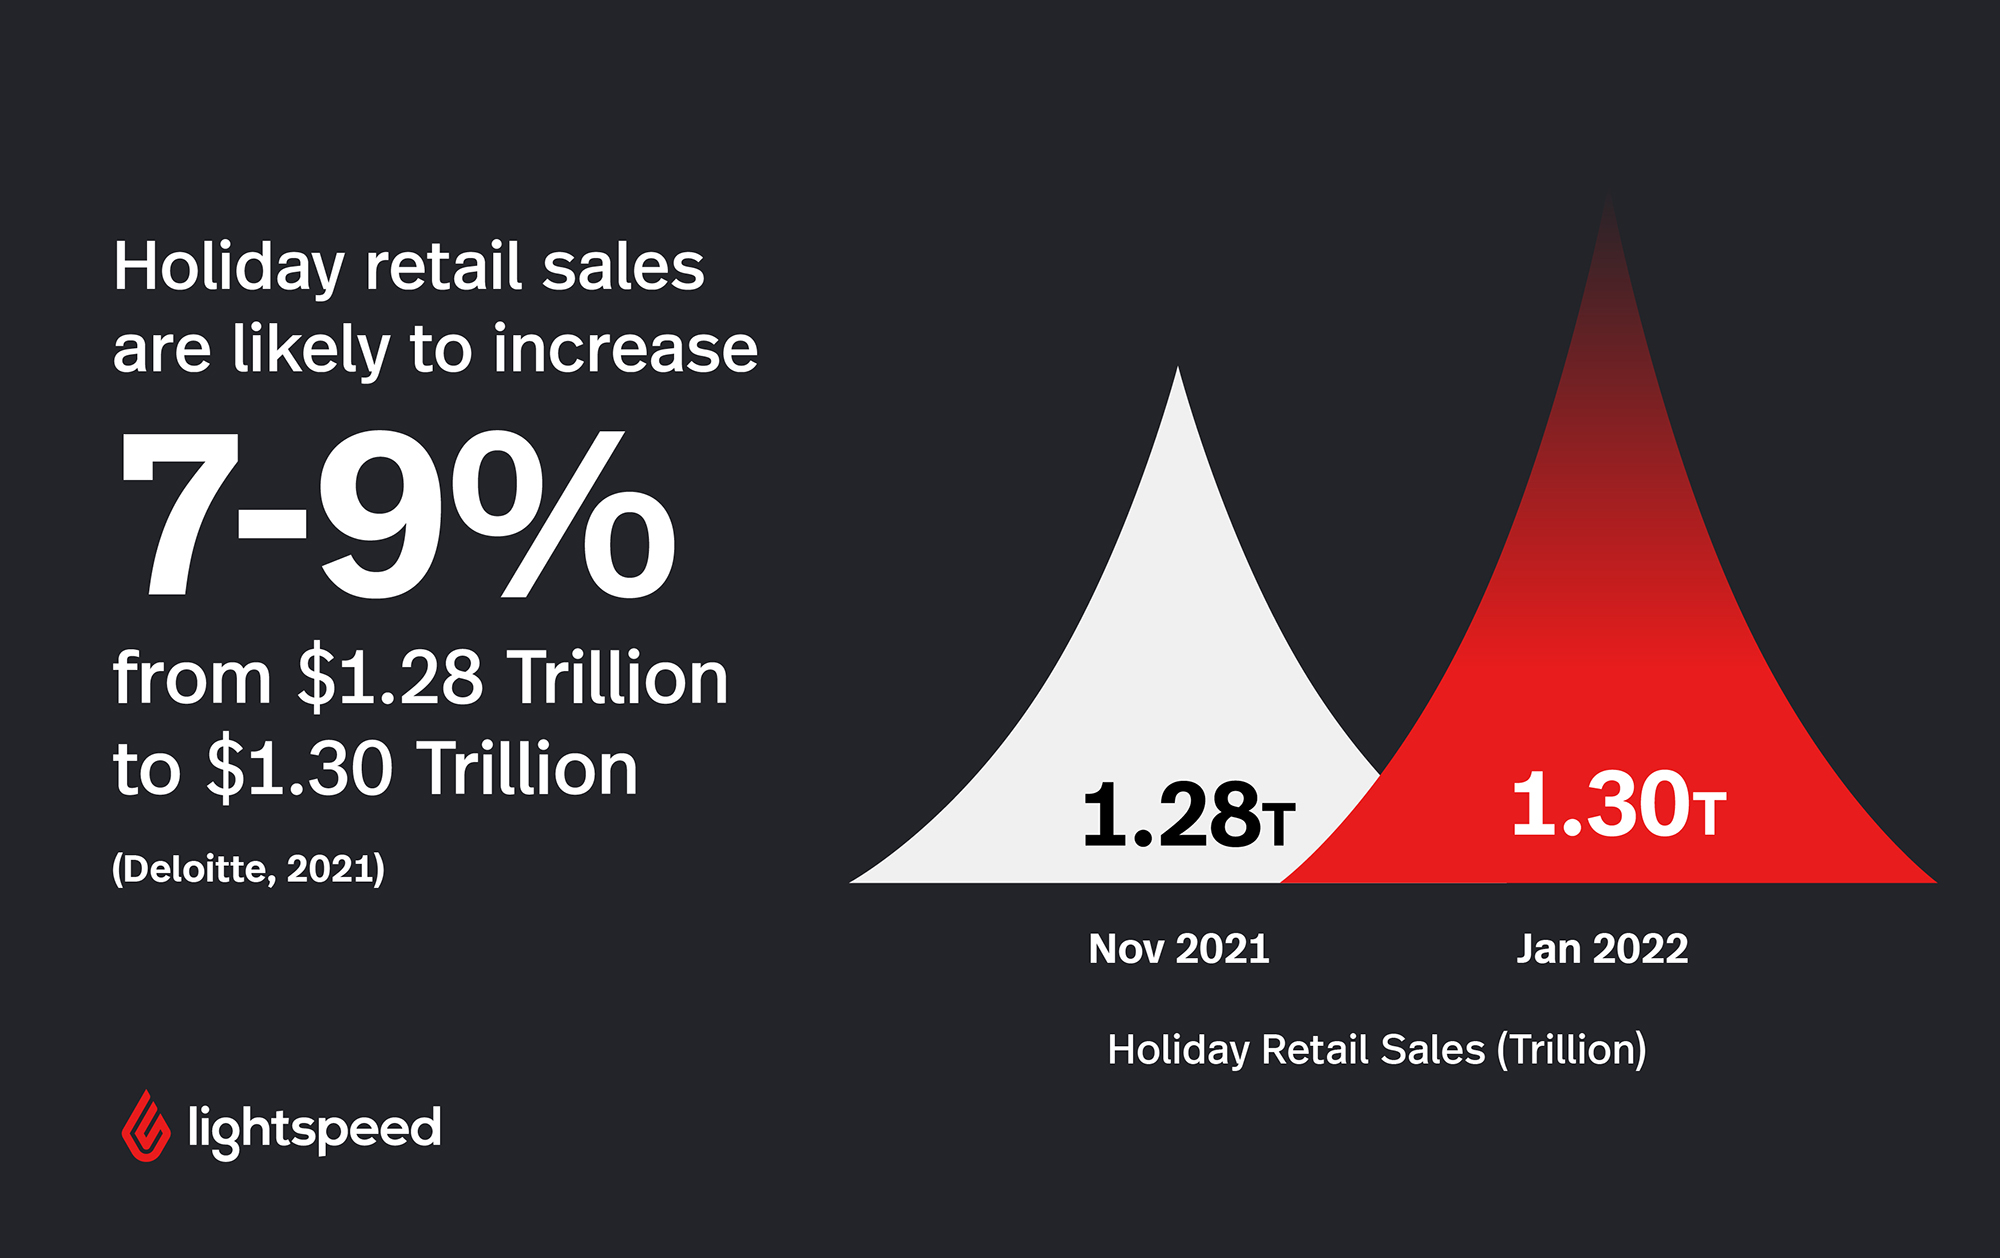 Illustration of holiday retail sales likely to increase from Nov. 2021 to Jan. 2022. 